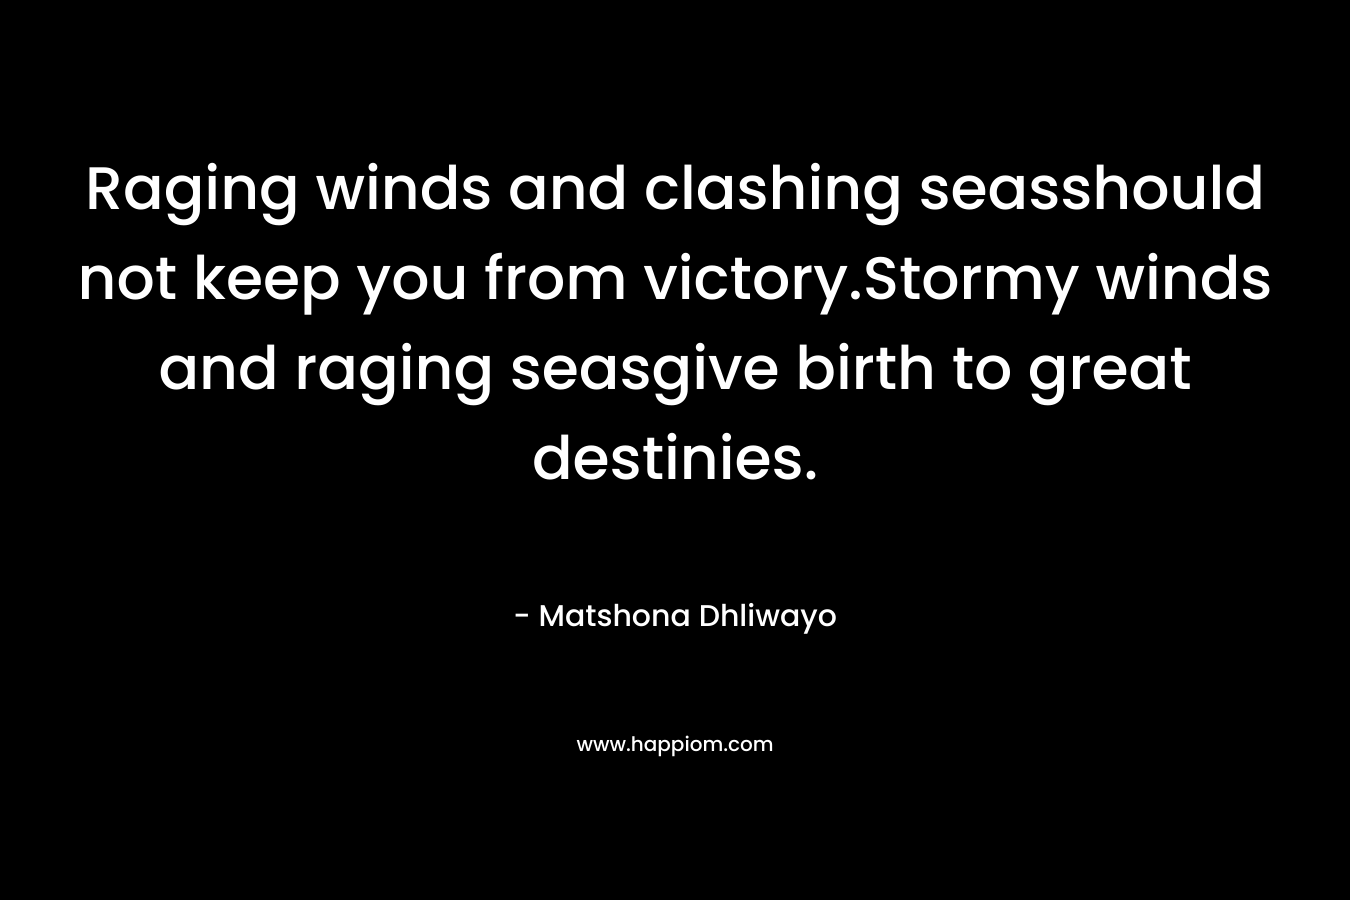 Raging winds and clashing seasshould not keep you from victory.Stormy winds and raging seasgive birth to great destinies. – Matshona Dhliwayo